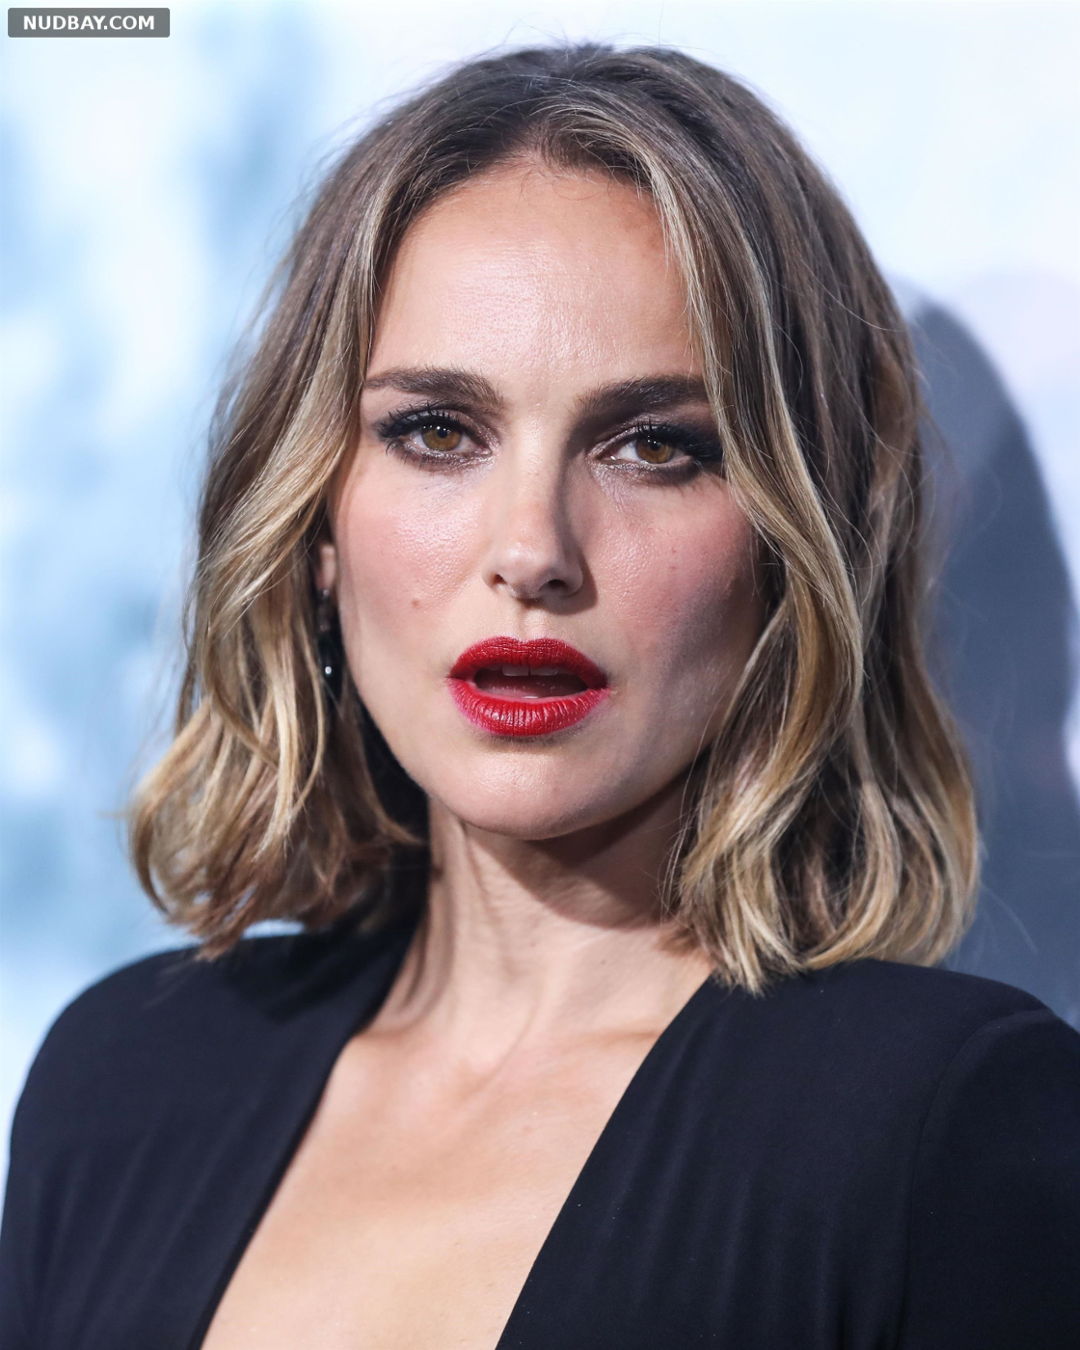 Natalie Portman FACE at the premiere of Lucy In The Sky in Los Angeles Sep 25 2019